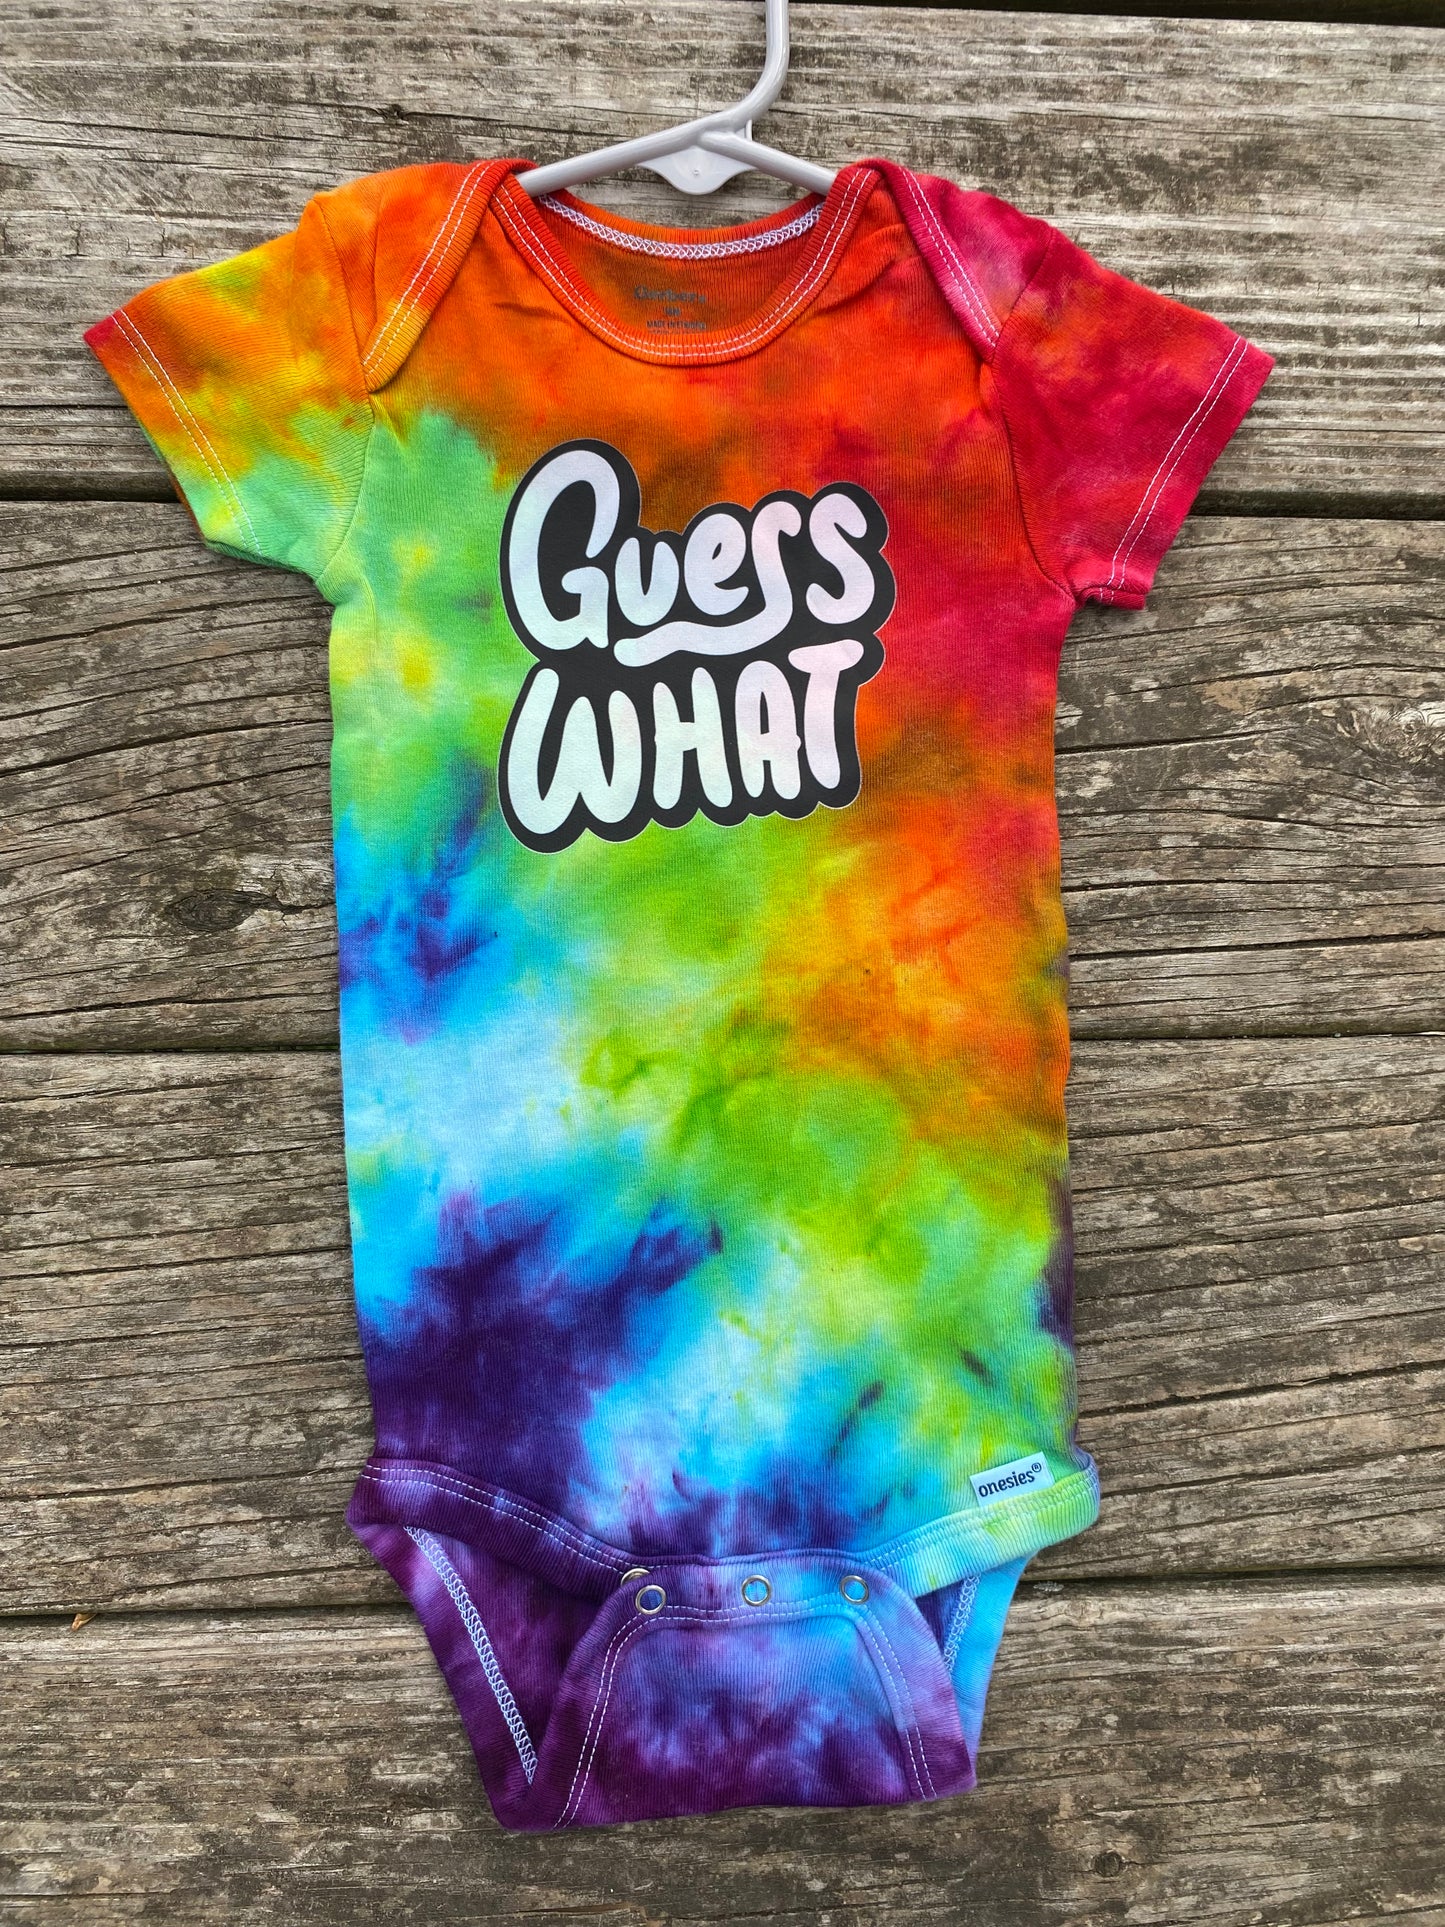 Guess what? Chicken Butt! Baby bodysuit ice dyed rainbow size 18 month